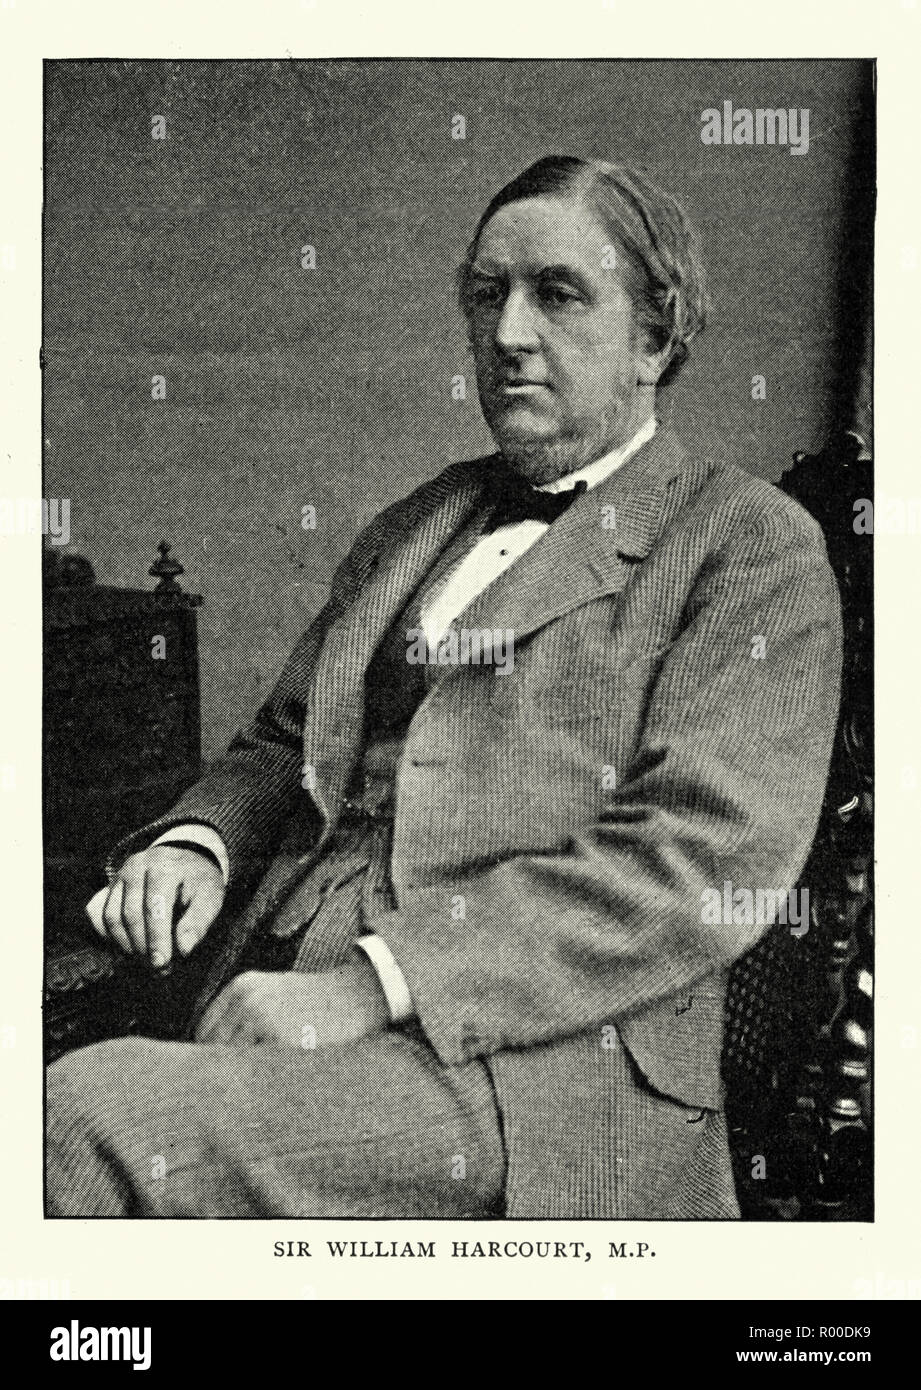 Sir William Harcourt, a British lawyer, journalist and Liberal statesman. He served as Member of Parliament and held the offices of Home Secretary and Chancellor of the Exchequer under William Ewart Gladstone before becoming Leader of the Opposition. Stock Photo